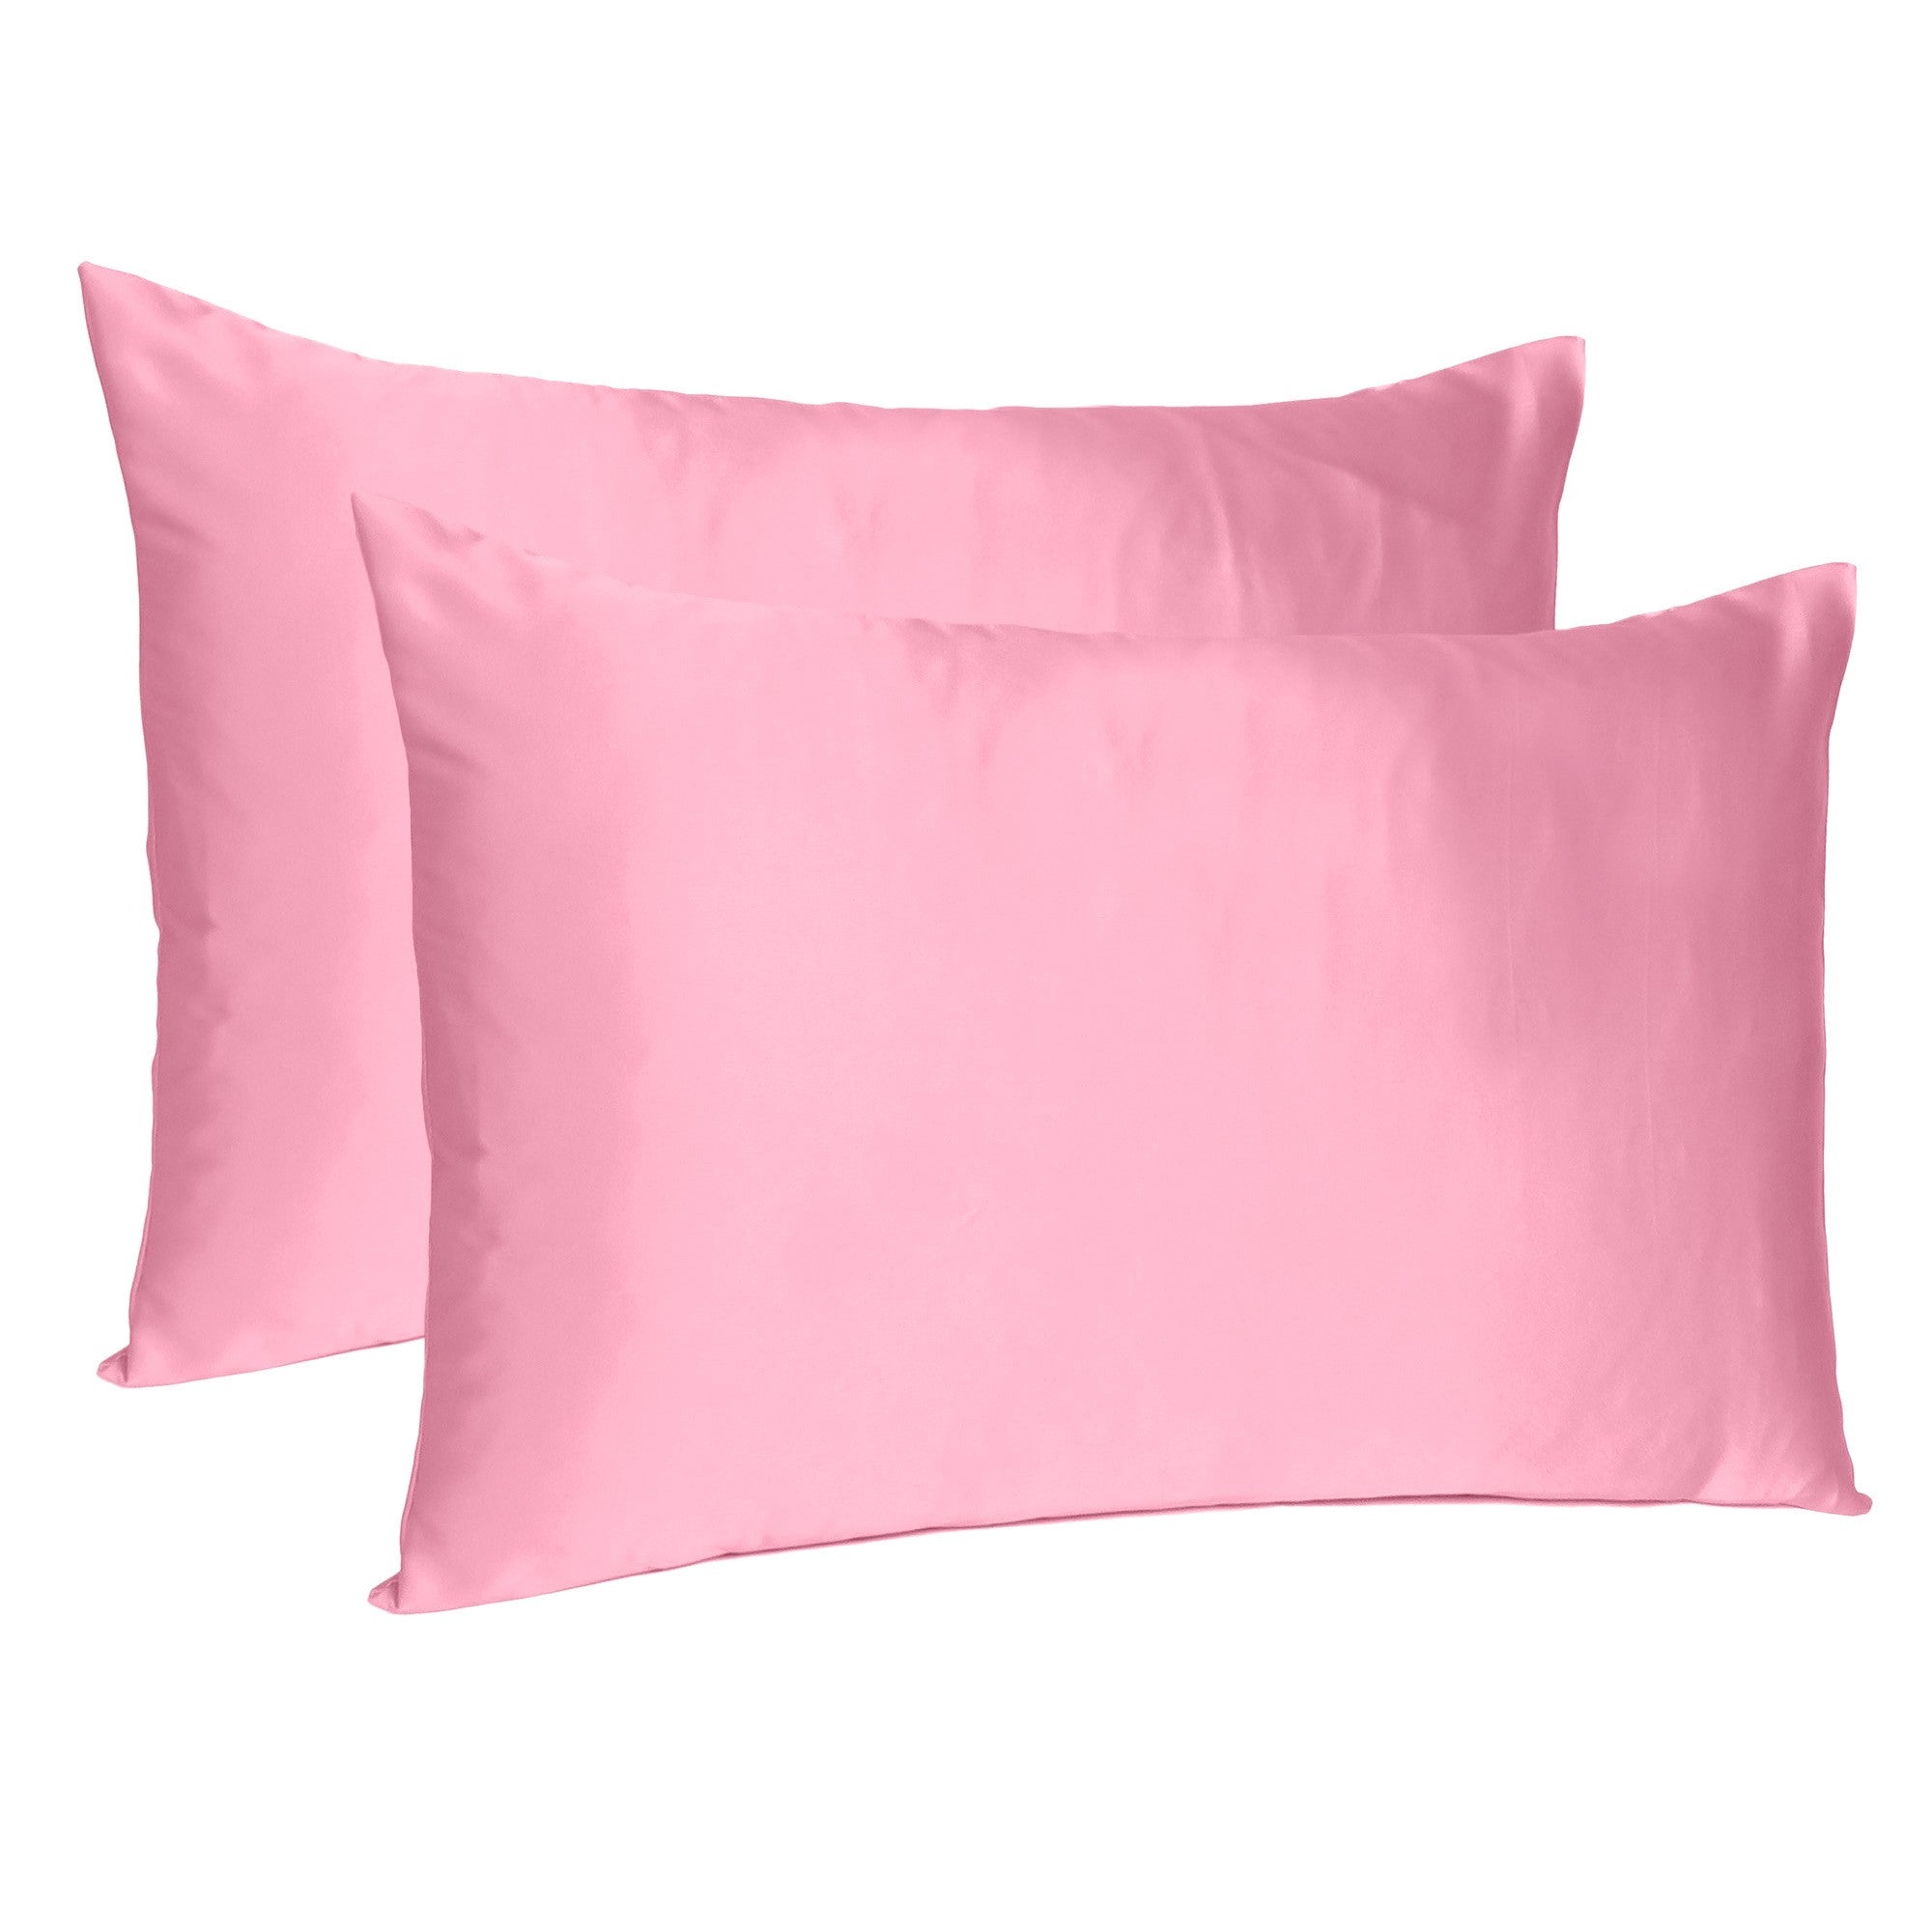 Pink-Rose-Dreamy-Set-Of-2-Silky-Satin-Standard-Pillowcases-Bed-Sheets